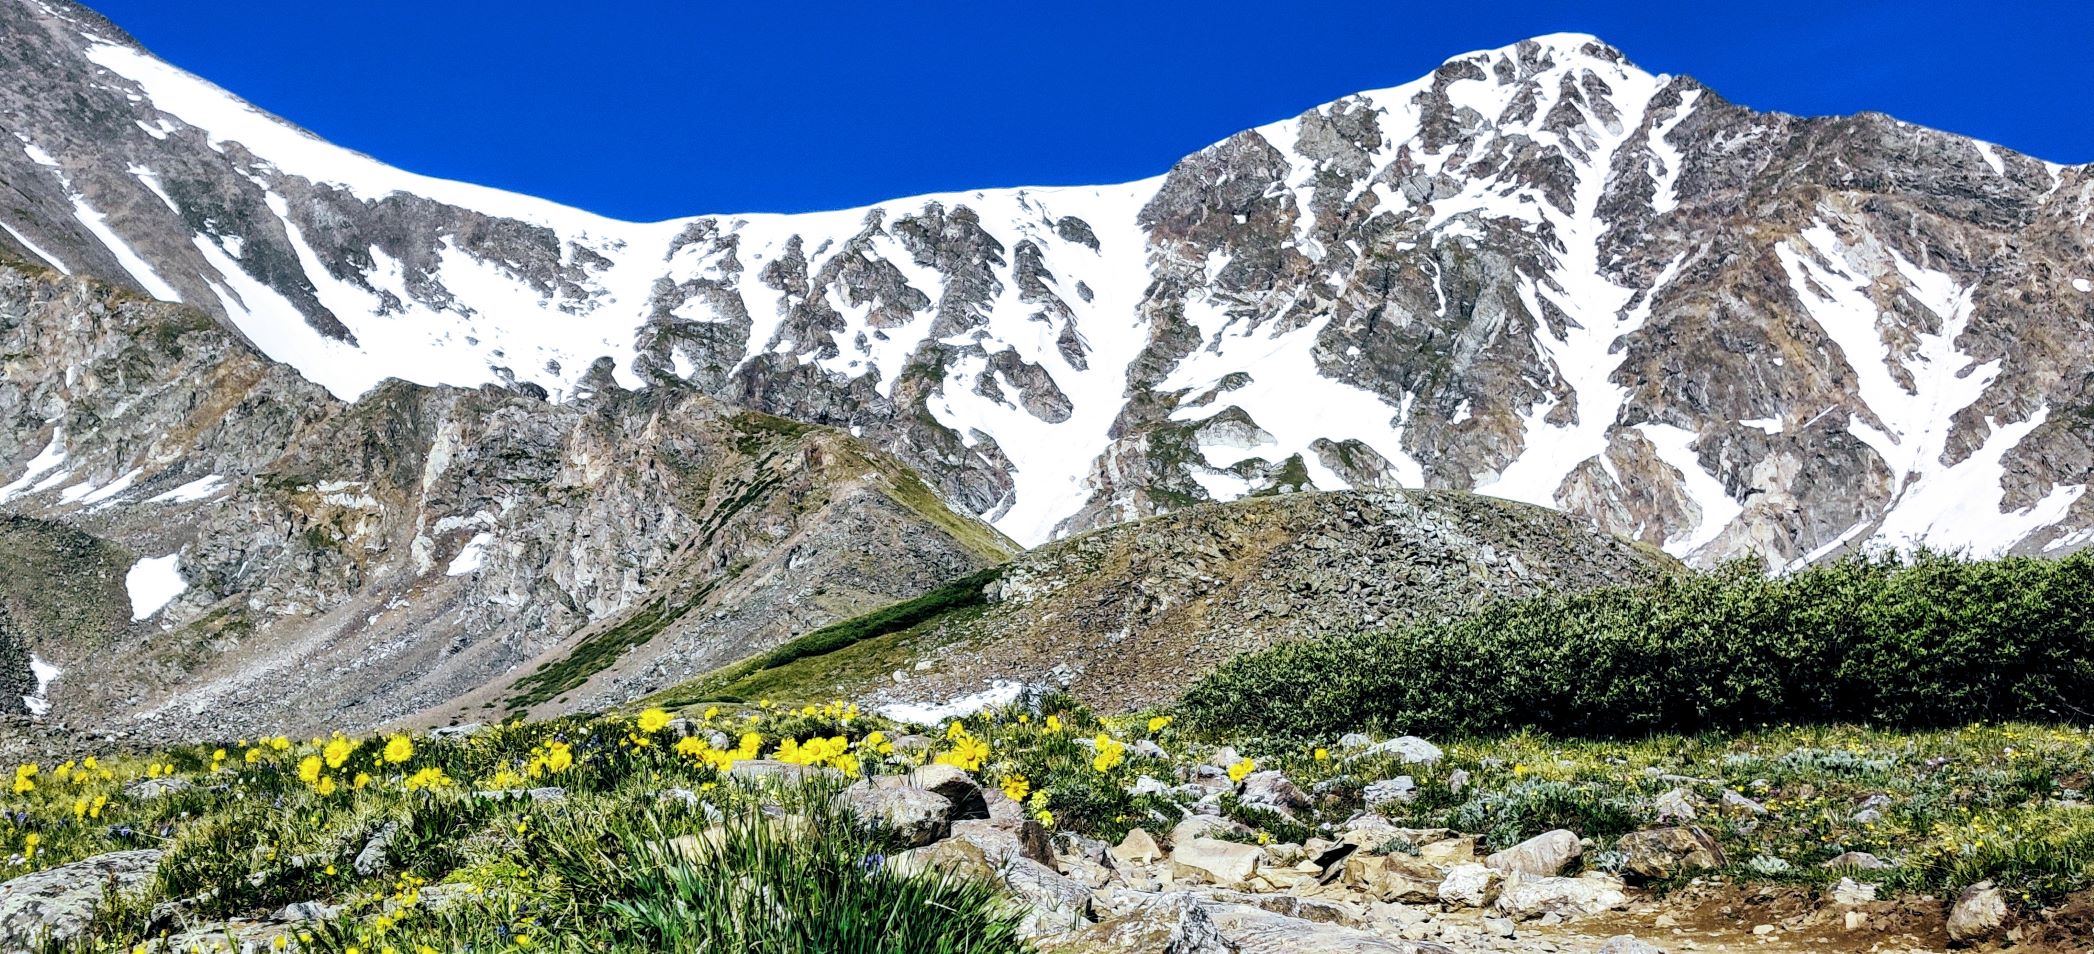 Two snow covered mountains 14,000 feet in elevation with yellow flowers in front and a deep blue sky above 